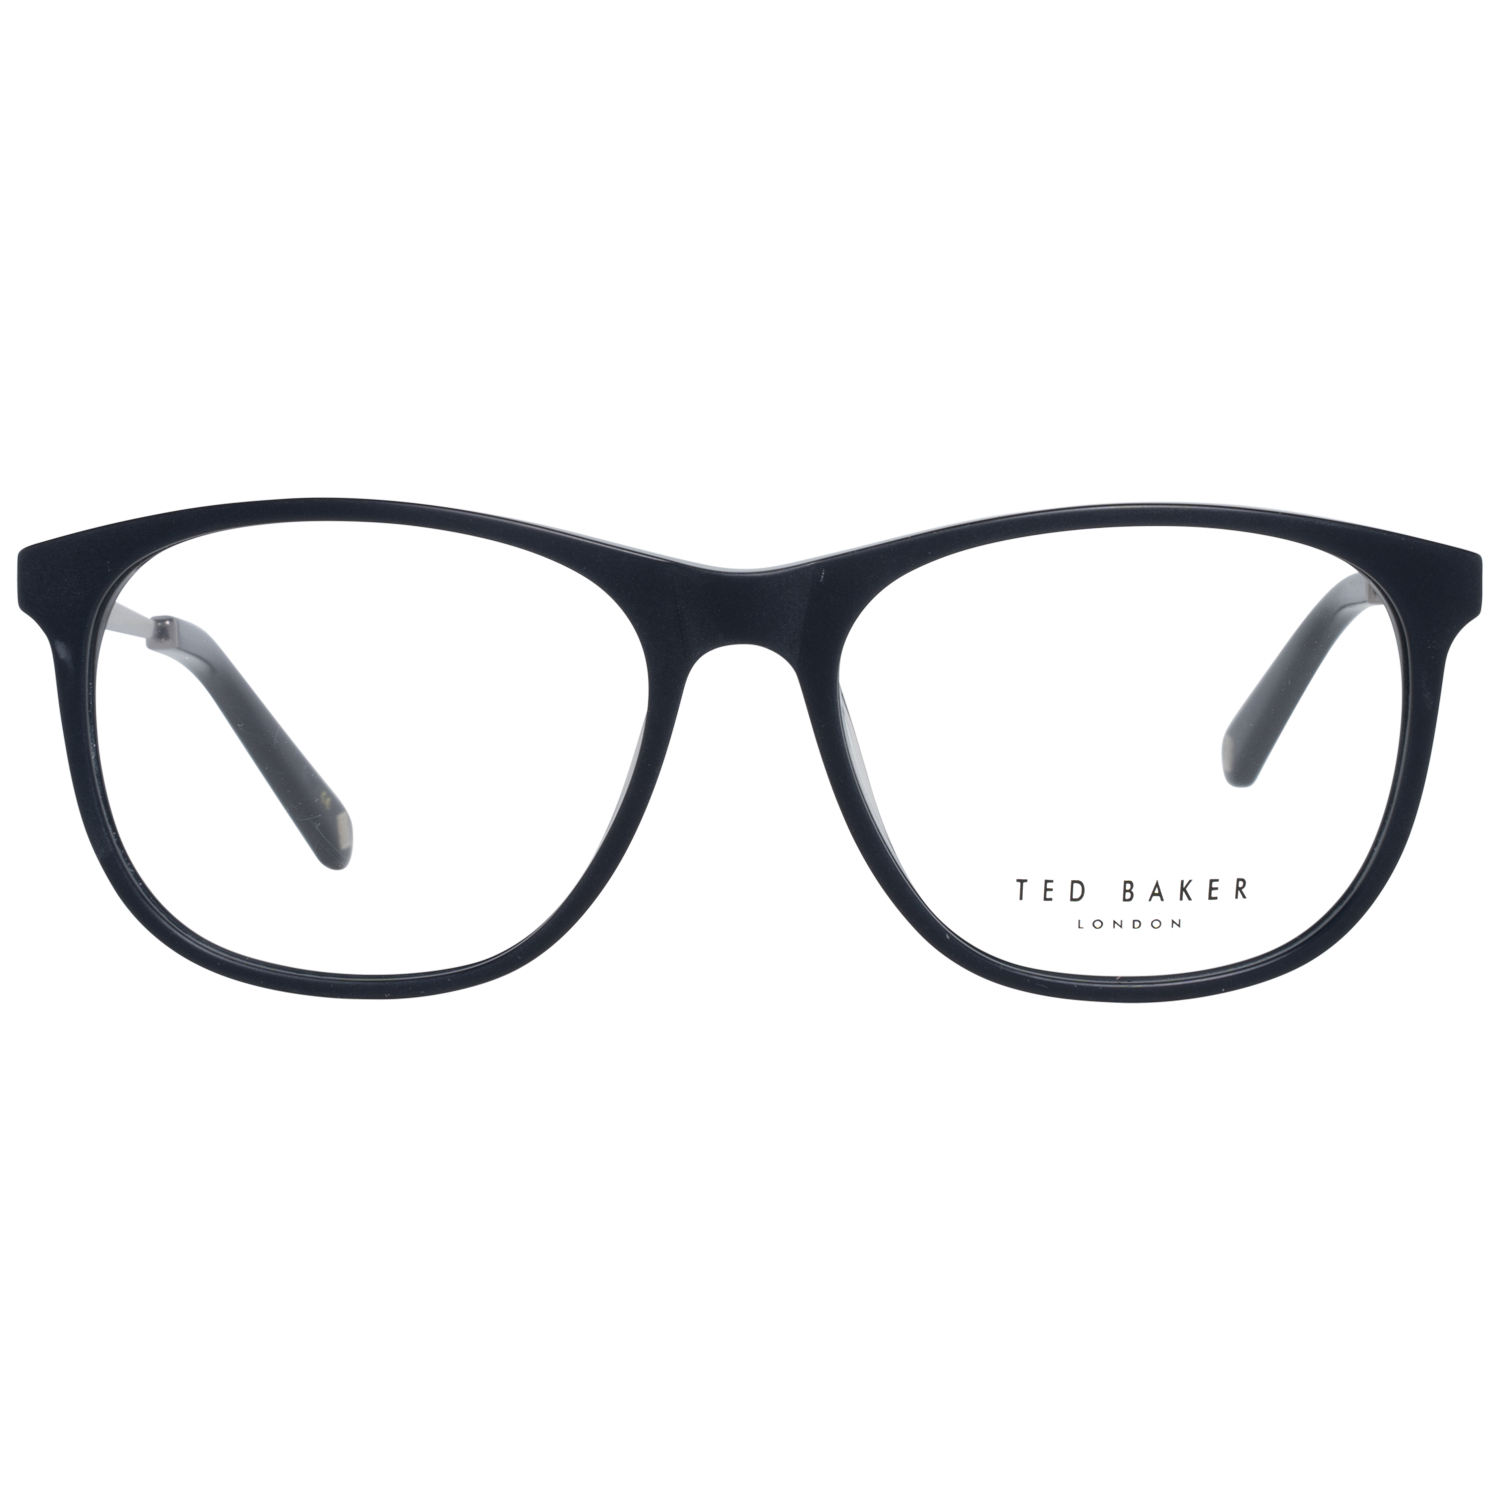 GenderMenMain colorBlueFrame colorBlueFrame materialPlasticSize54-16-145Lenses width54mmLenses heigth42mmBridge length16mmFrame width138mmTemple length145mmShipment includesCase, Cleaning clothStyleFull-RimSpring hingeYes